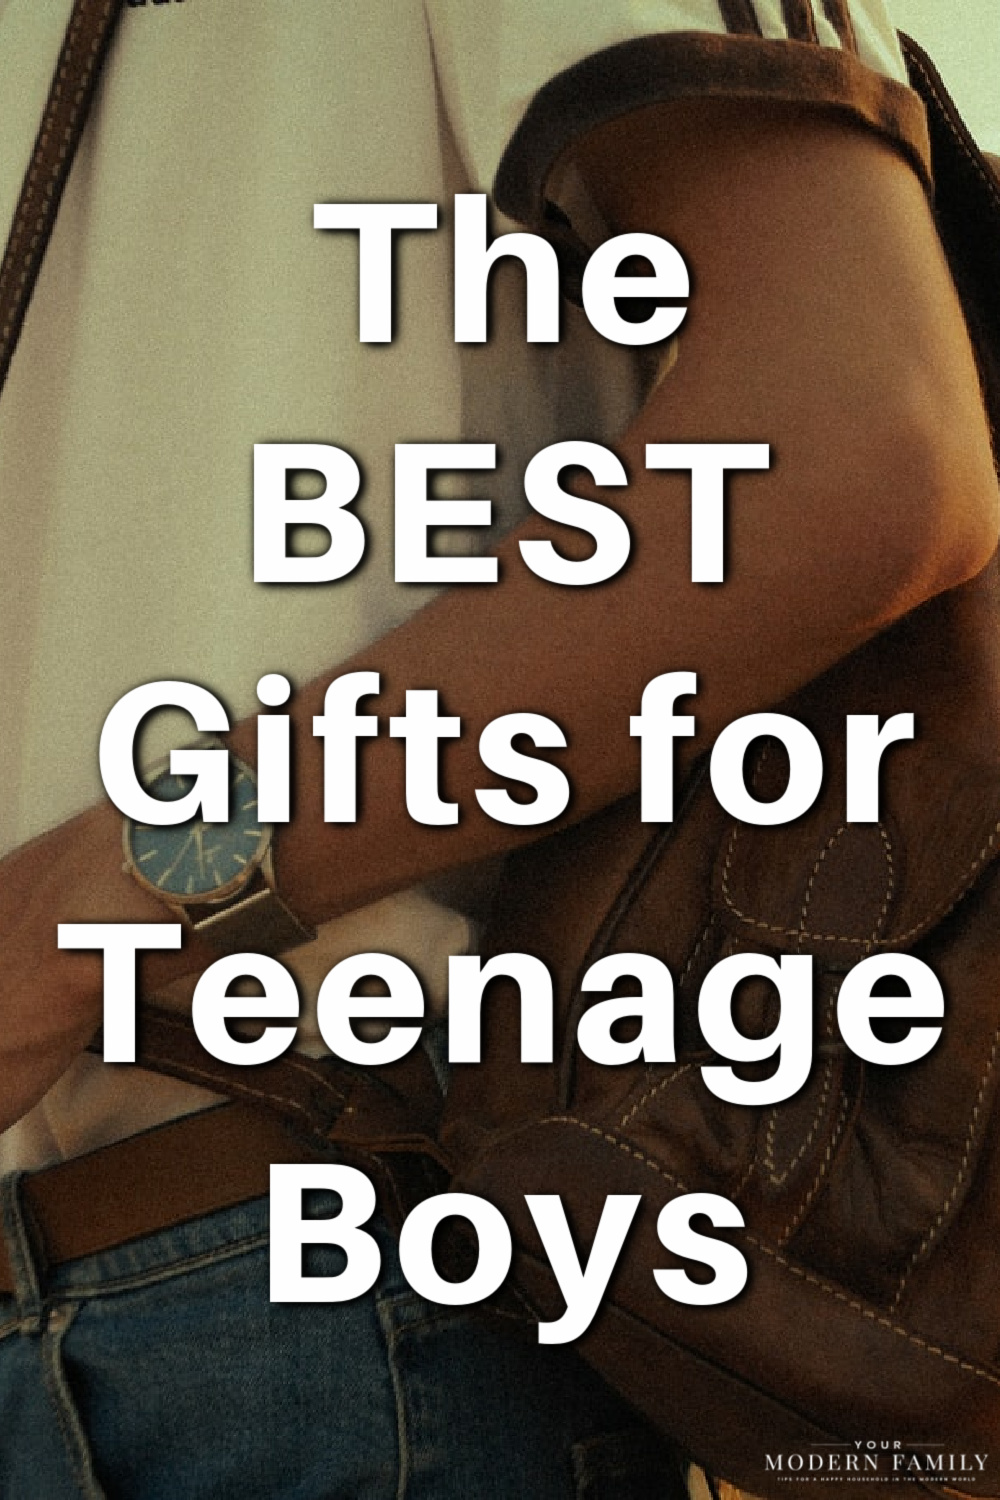 The best gifts for teenage boys